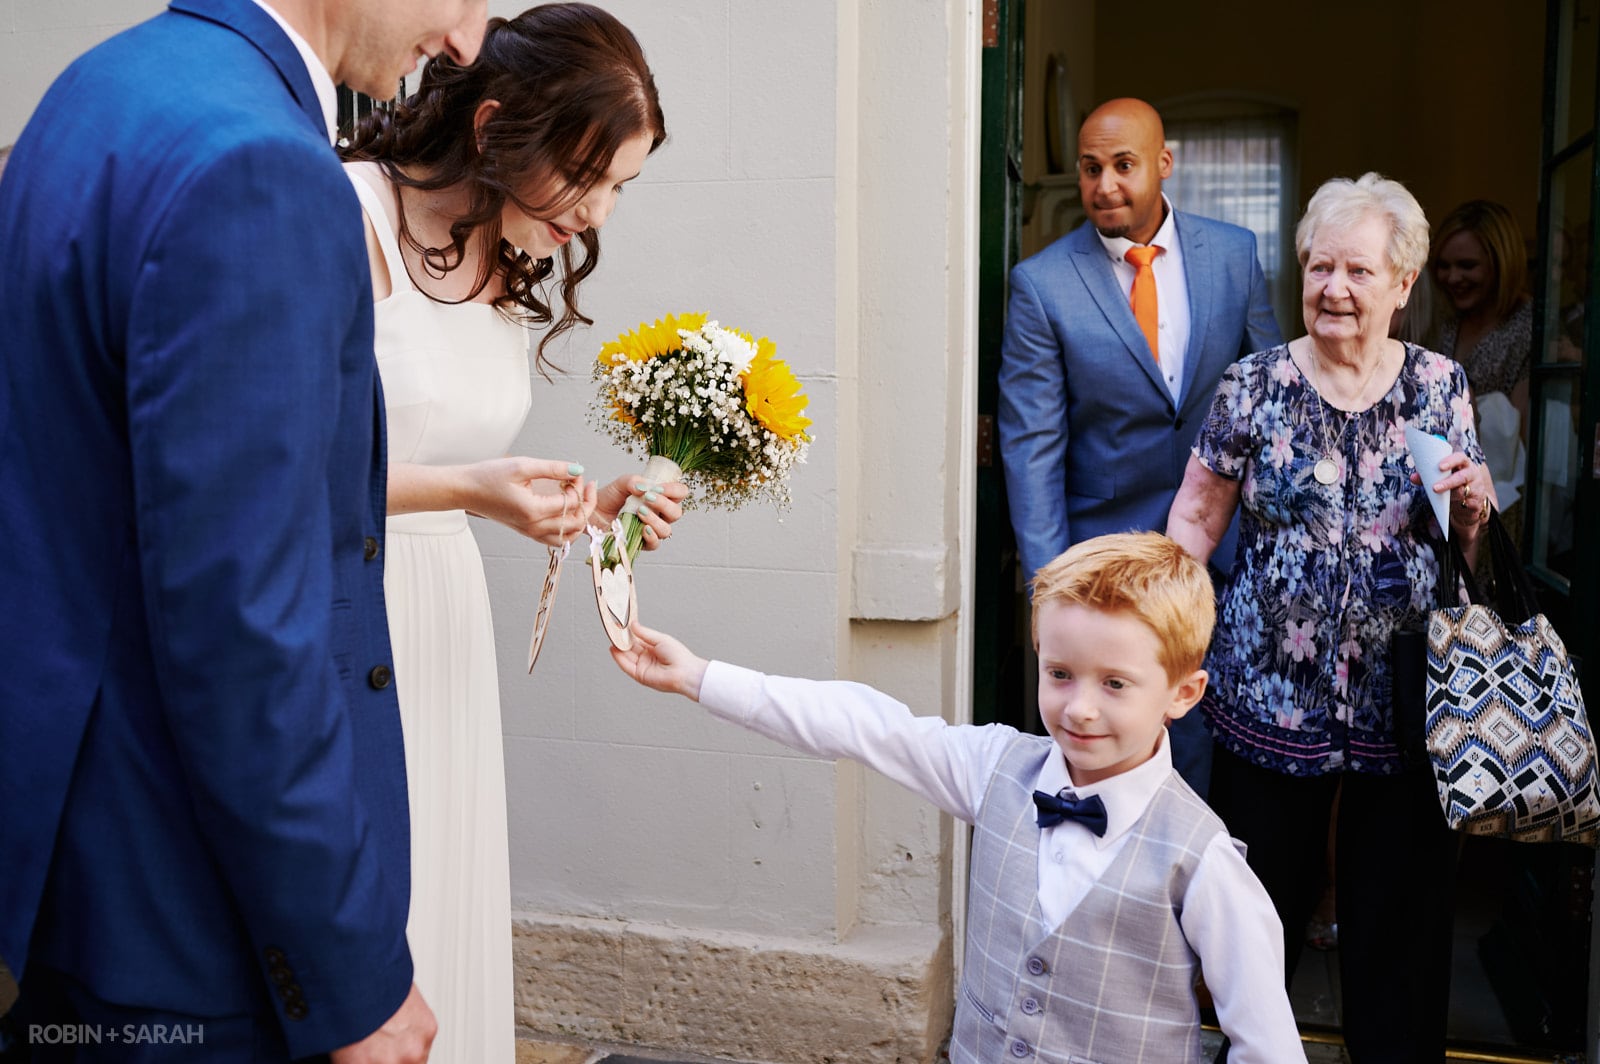 Young boy gives horsehoes to bride and groom after wedding ceremony